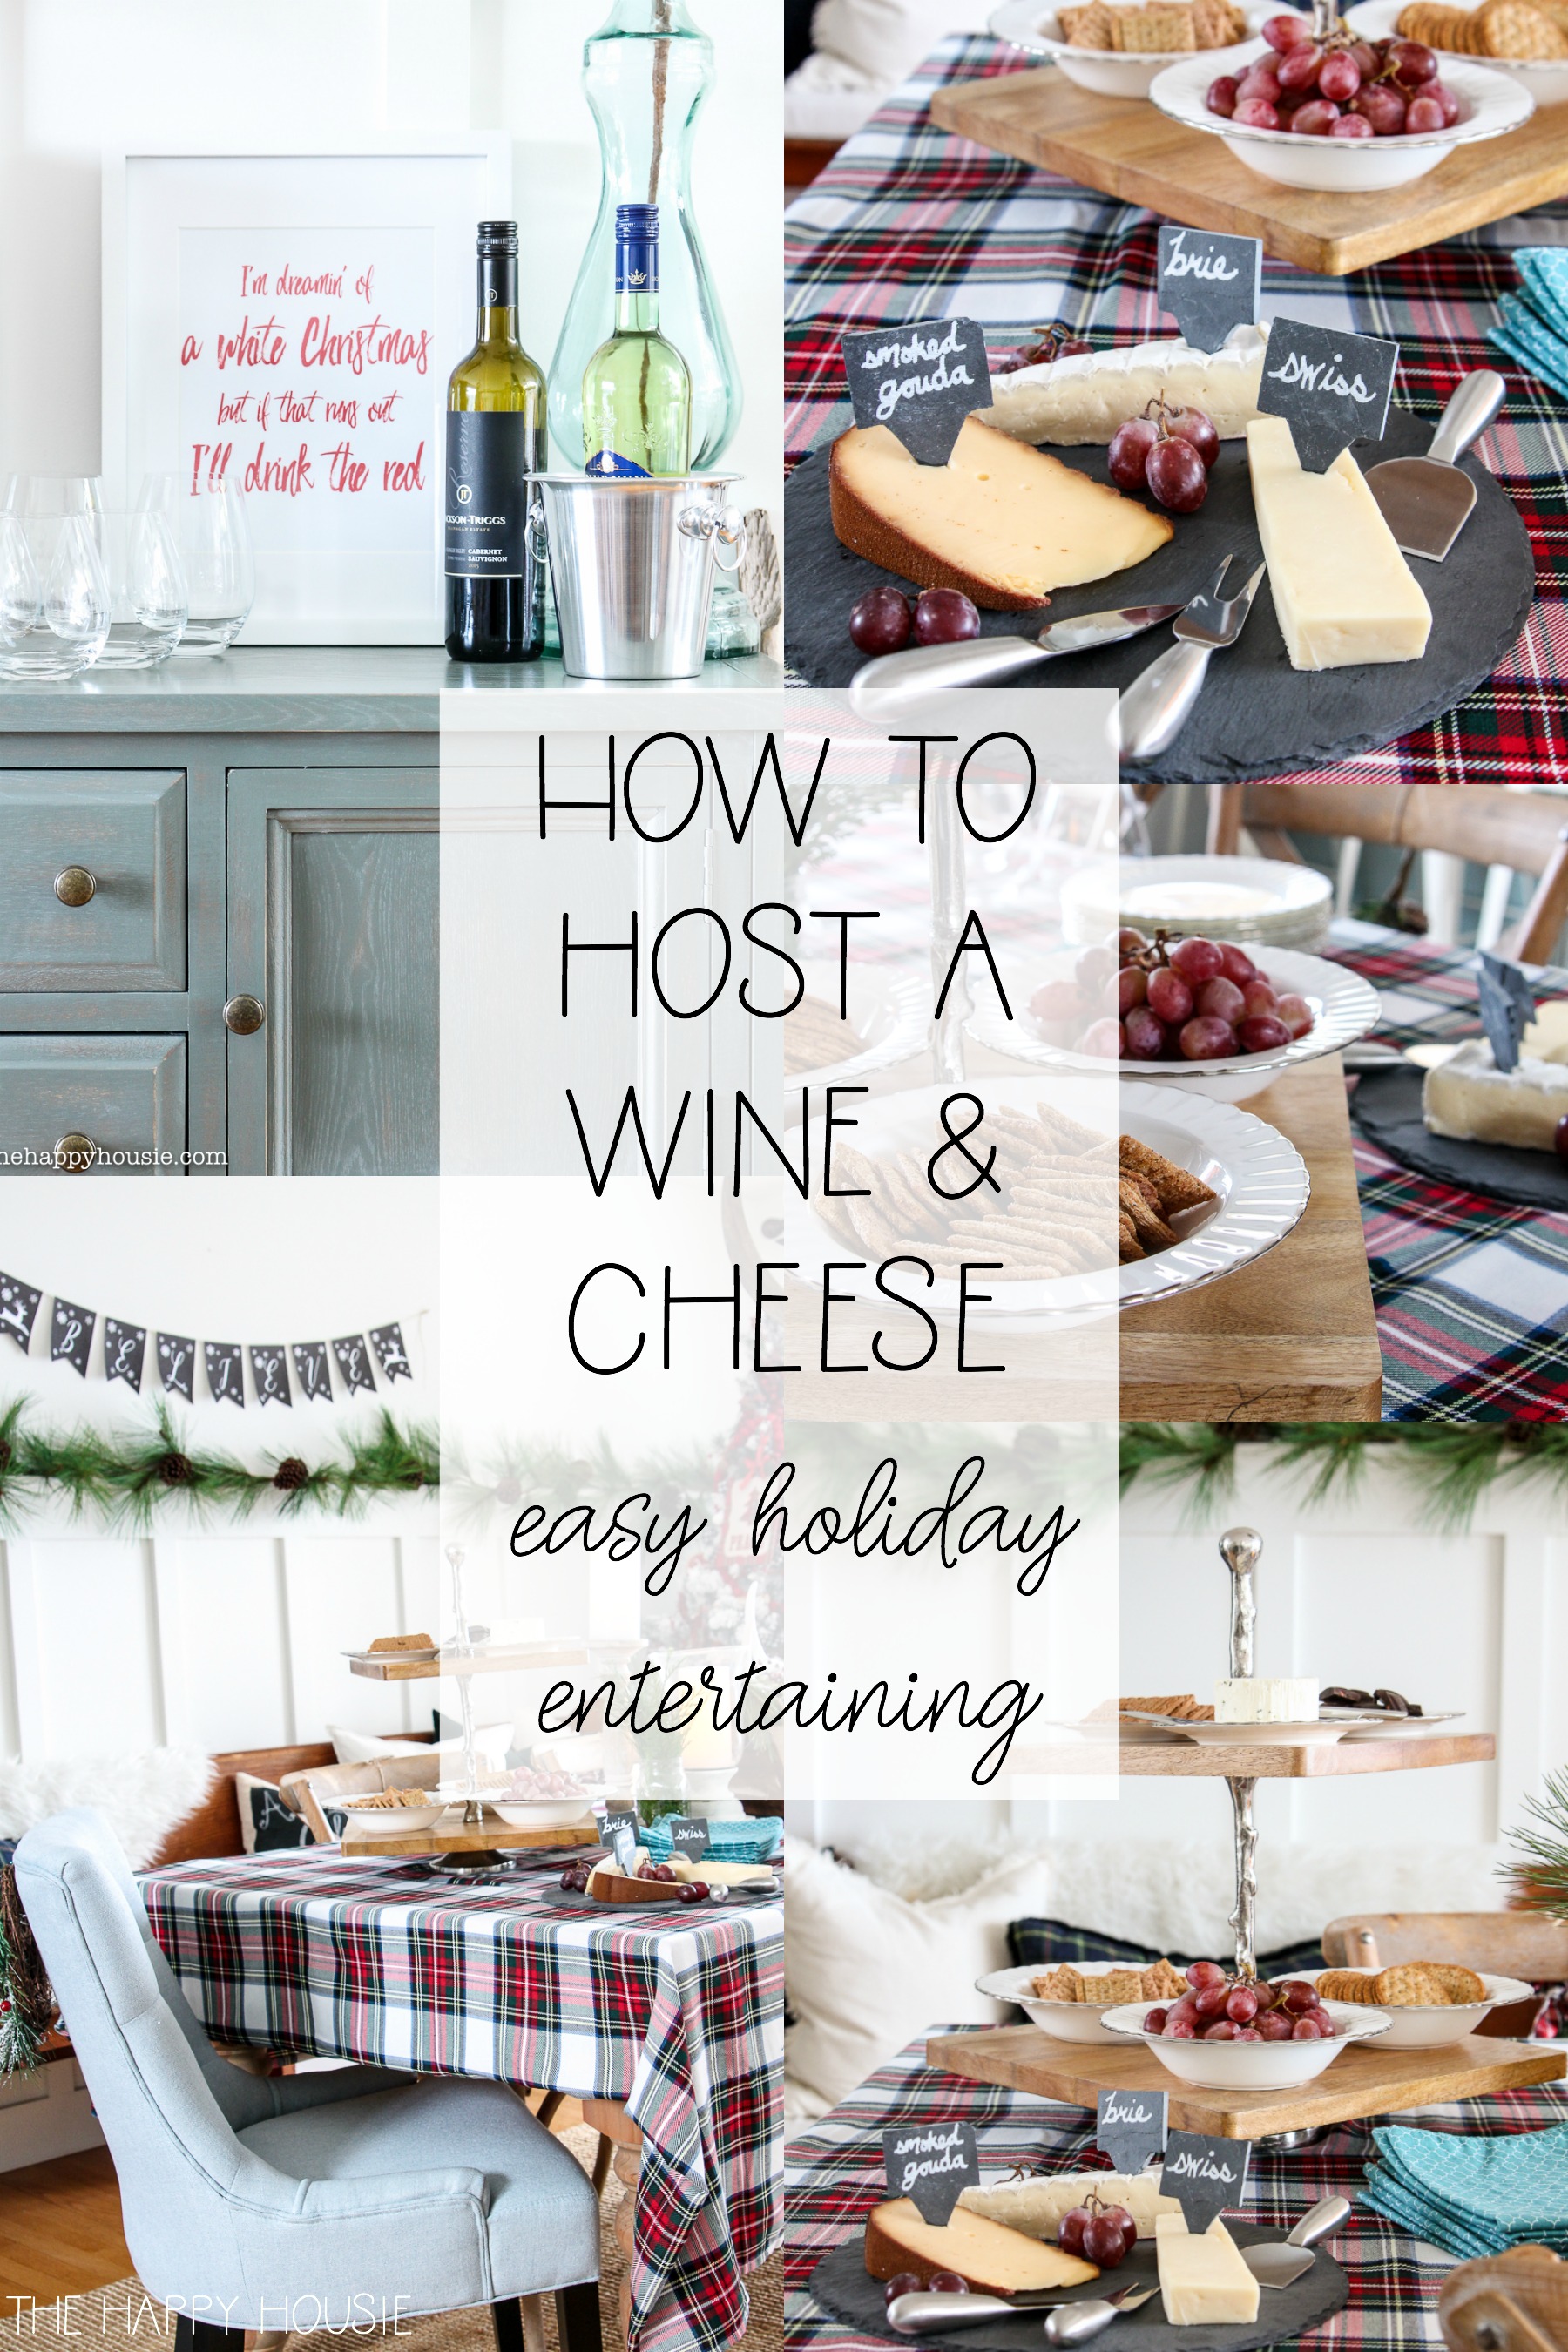 How To Host A Wine &Cheese poster.